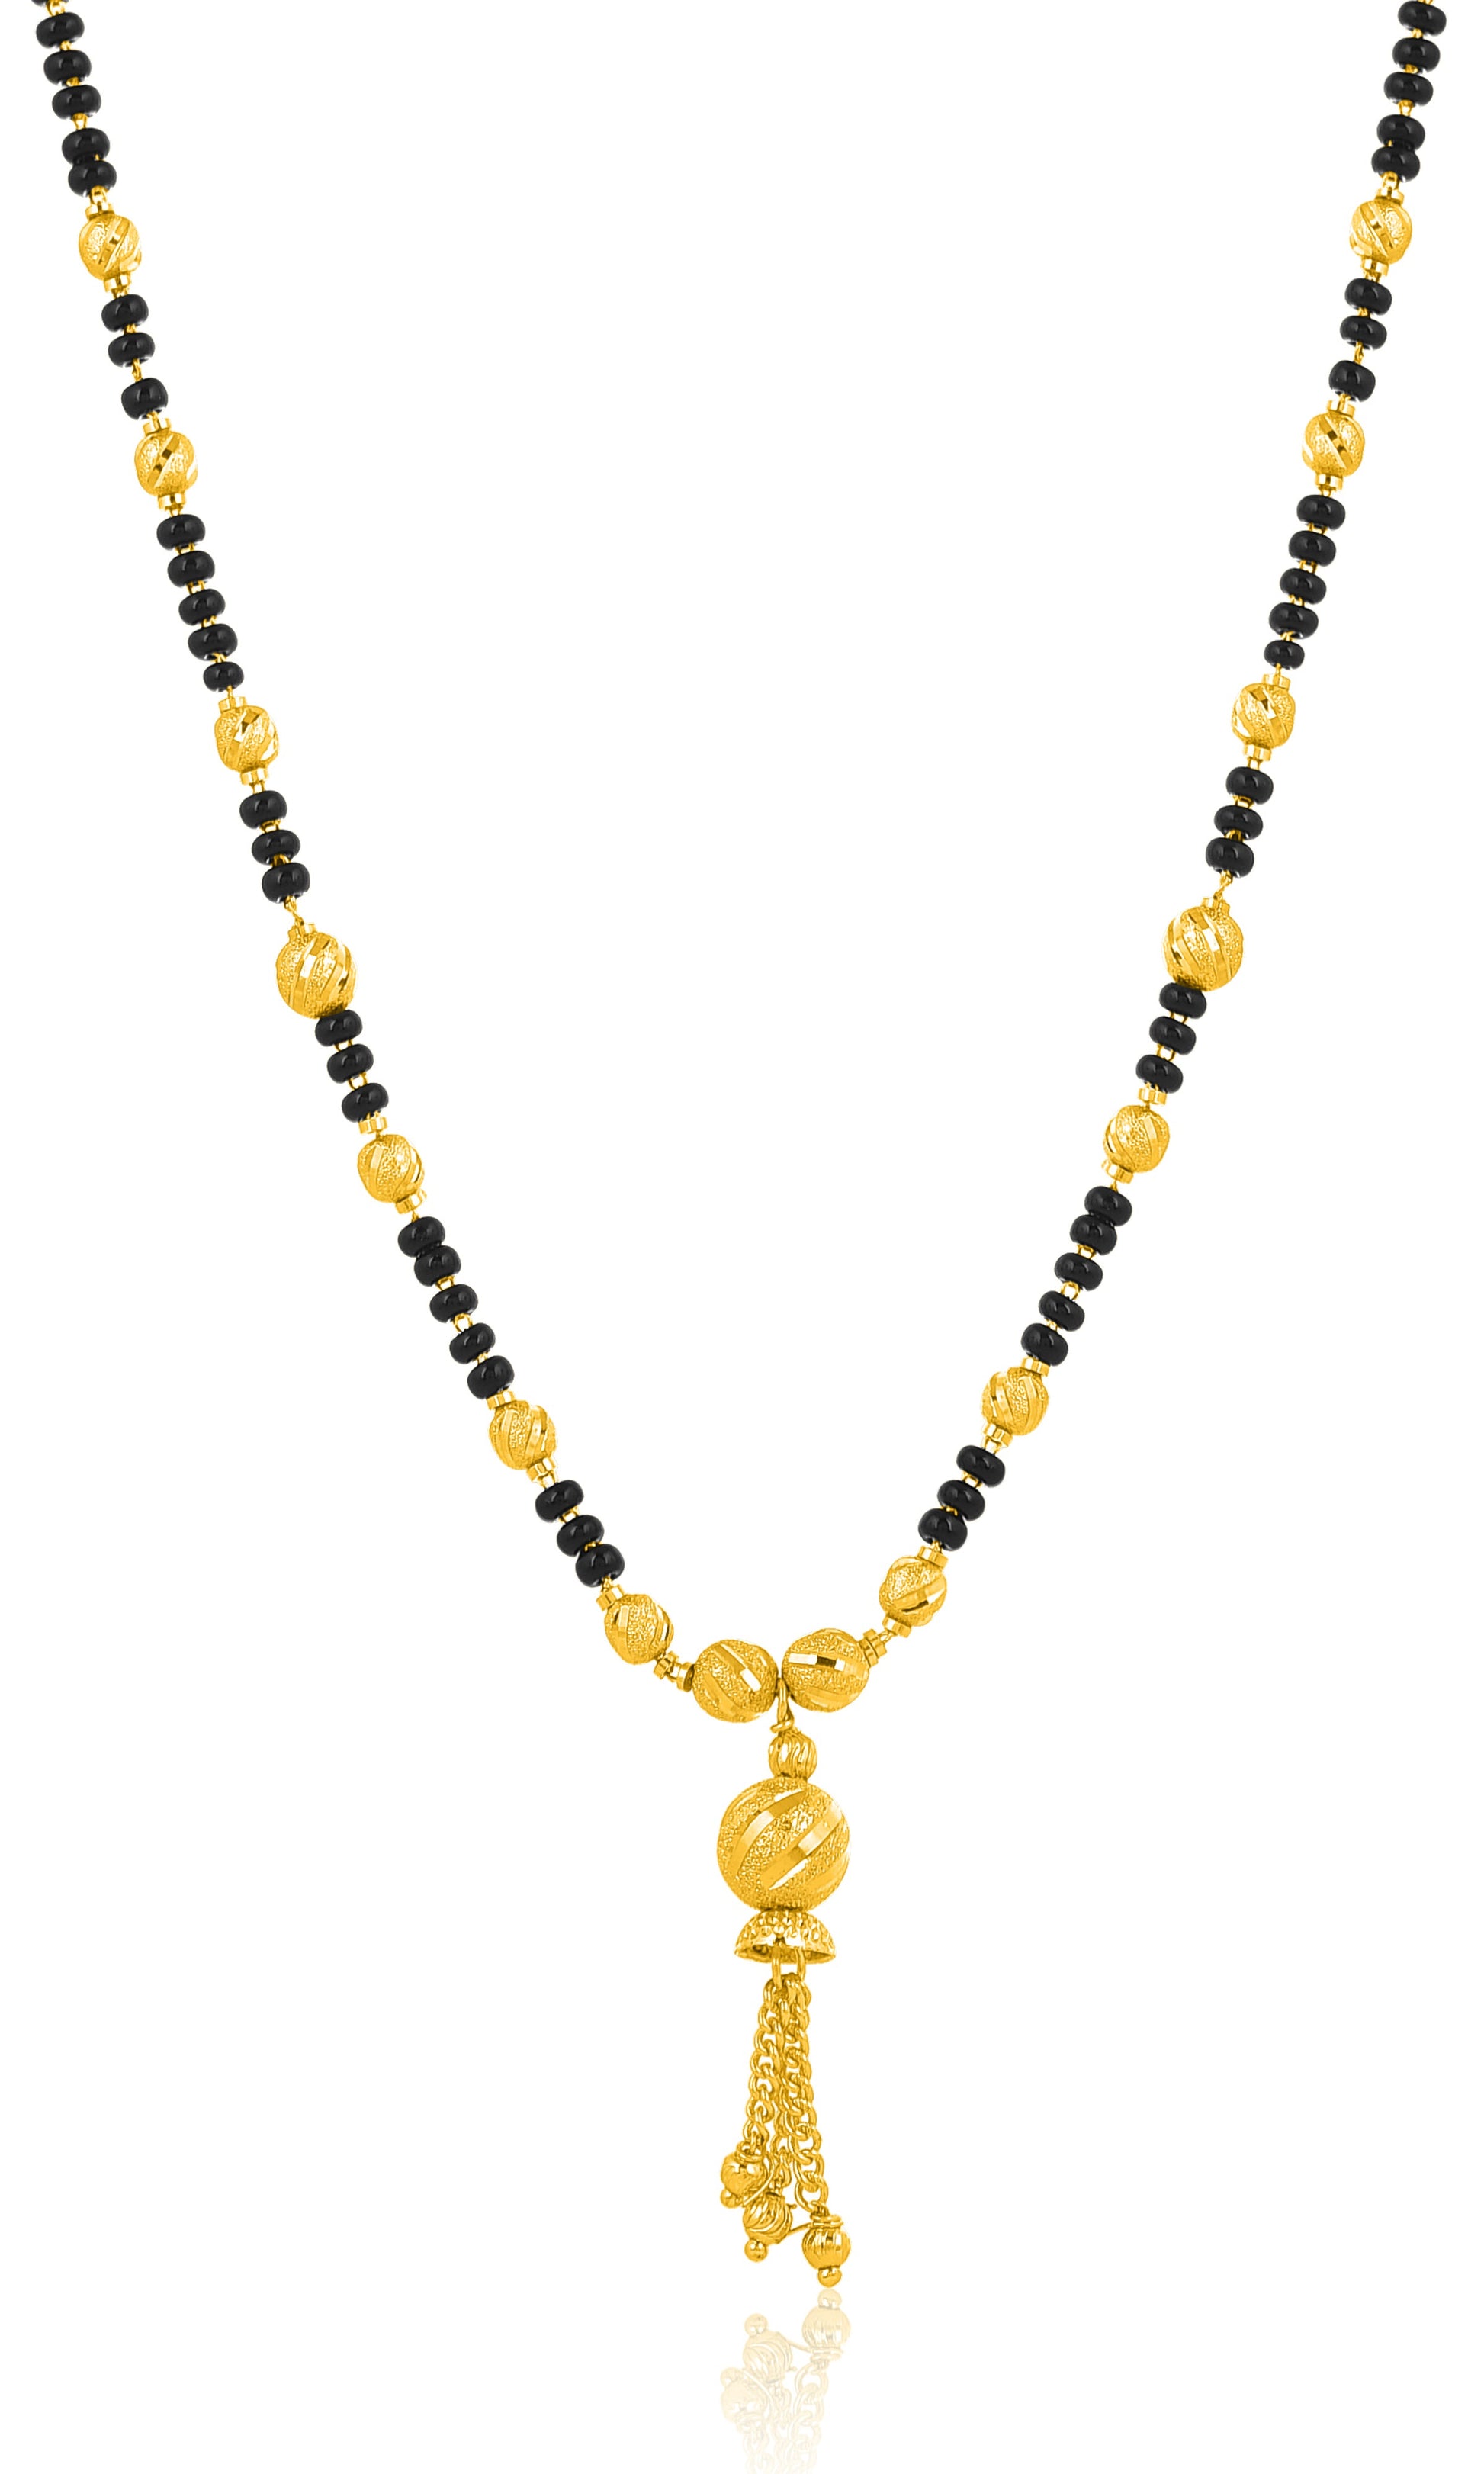 Gold Plated Mangalsutra From Mekkna | Buy Mangalsutra Online